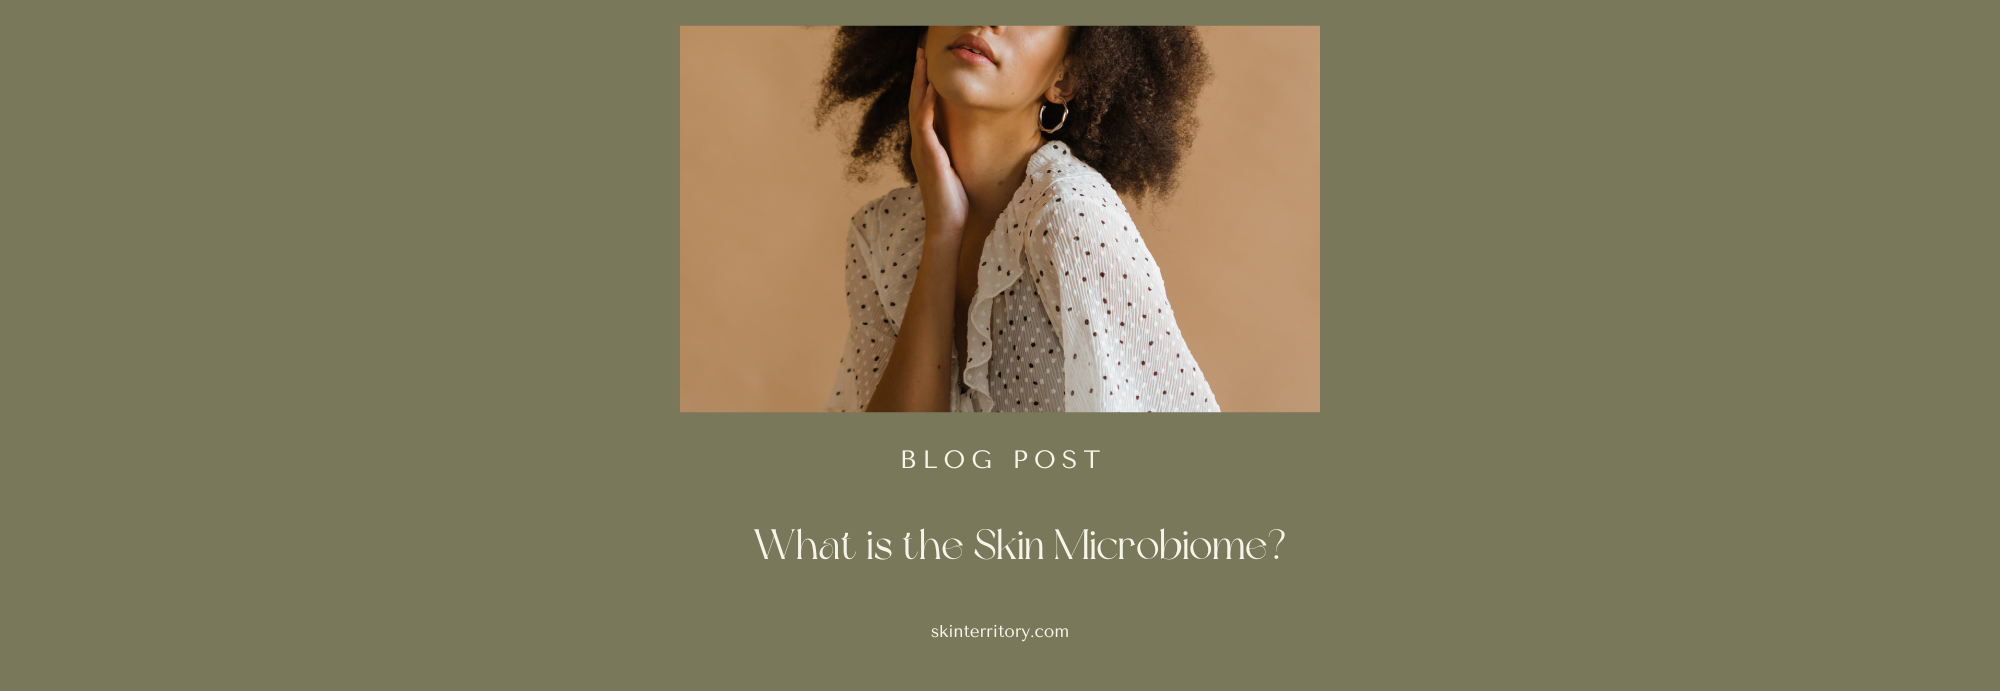 What is the skin microbiome?